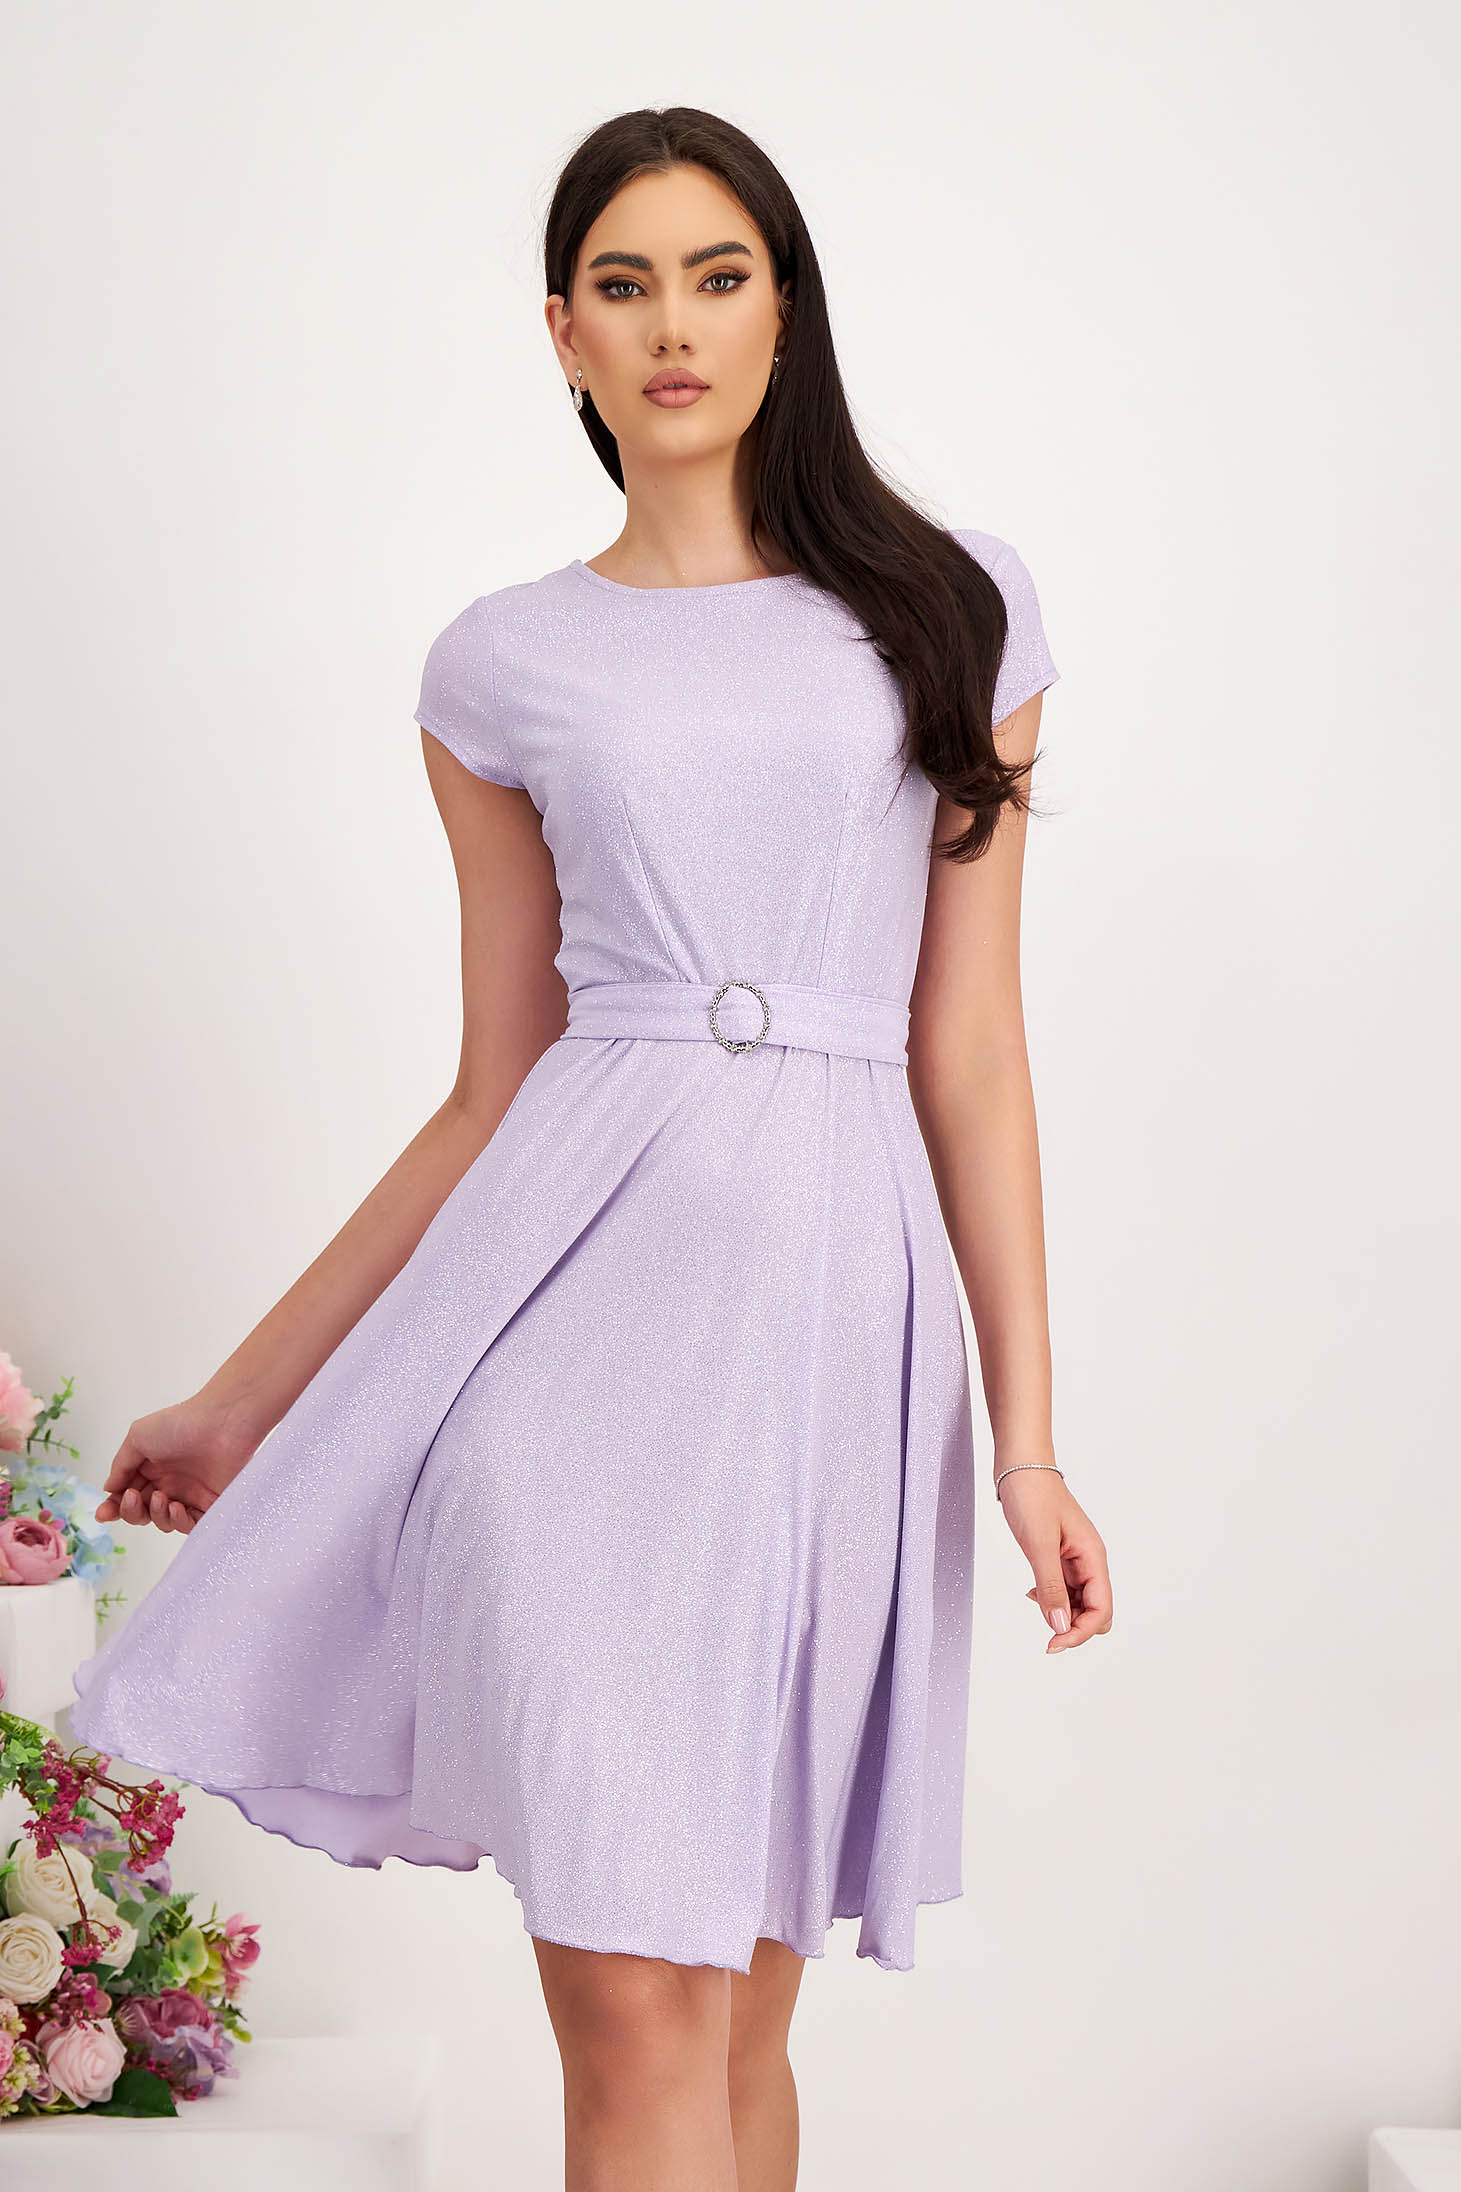 Lycra Dress with Lilac Glitter in Flared Style with Waist Elastic - StarShinerS 1 - StarShinerS.com